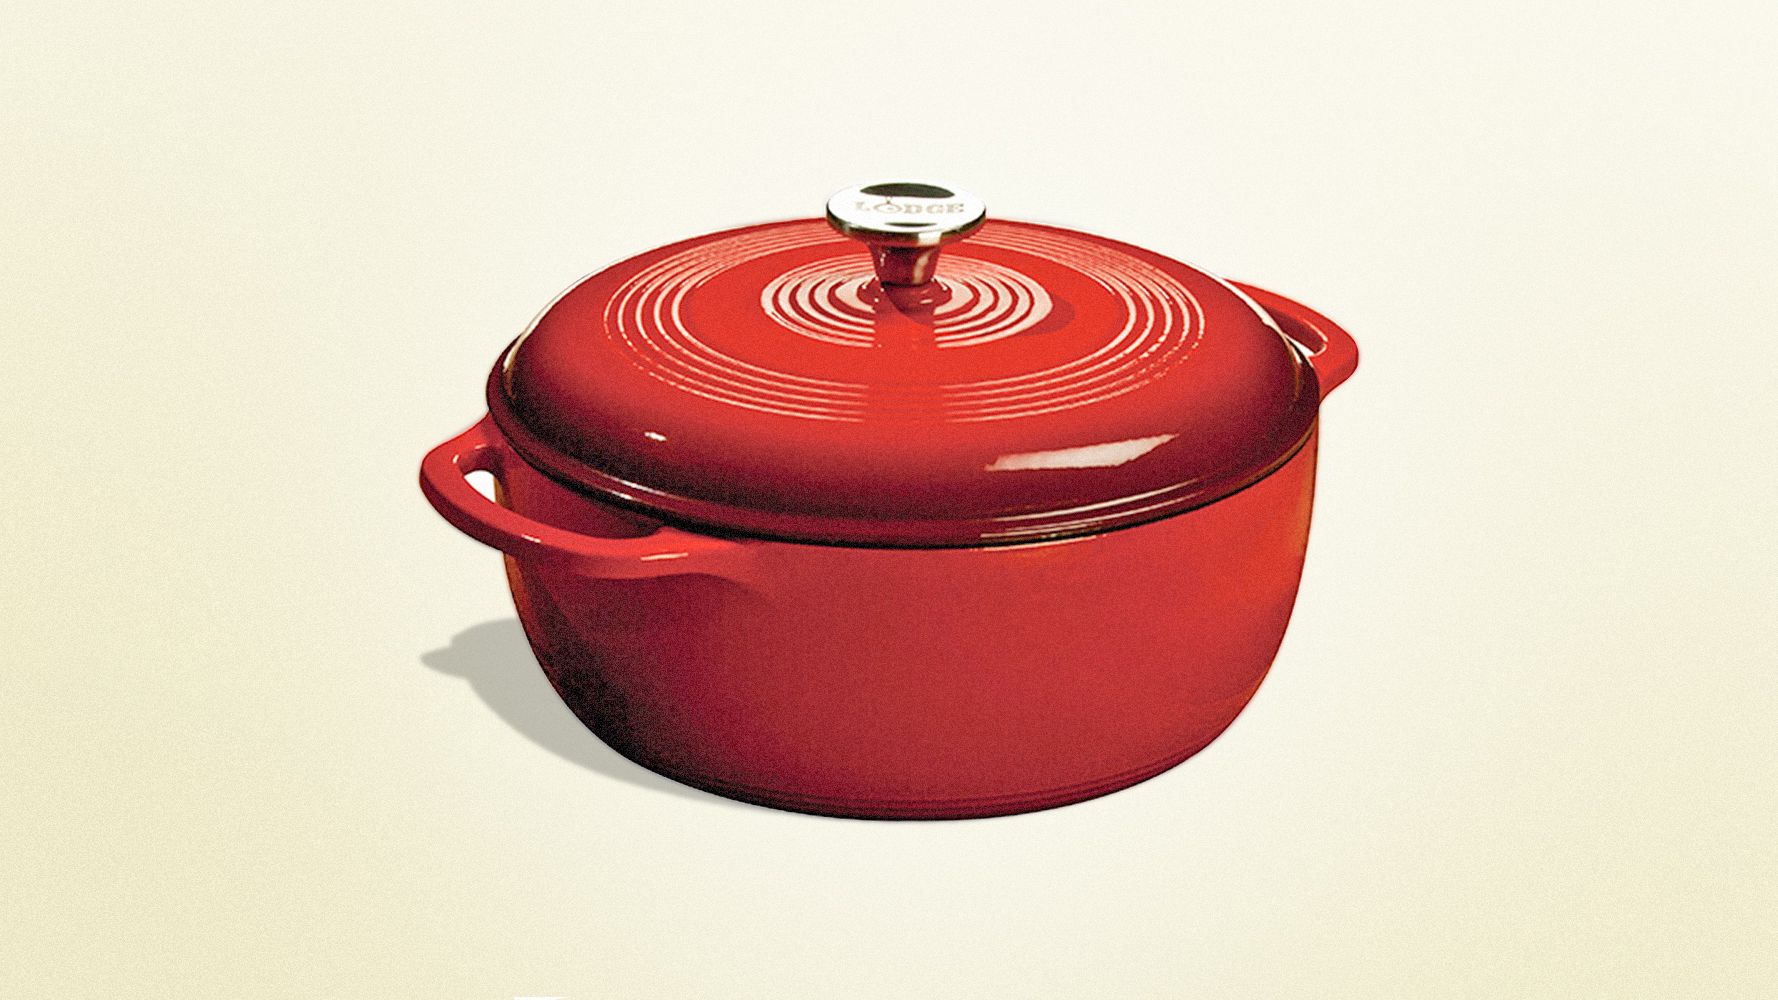 Lodge Just Released Its New American-Made Enameled Dutch Ovens